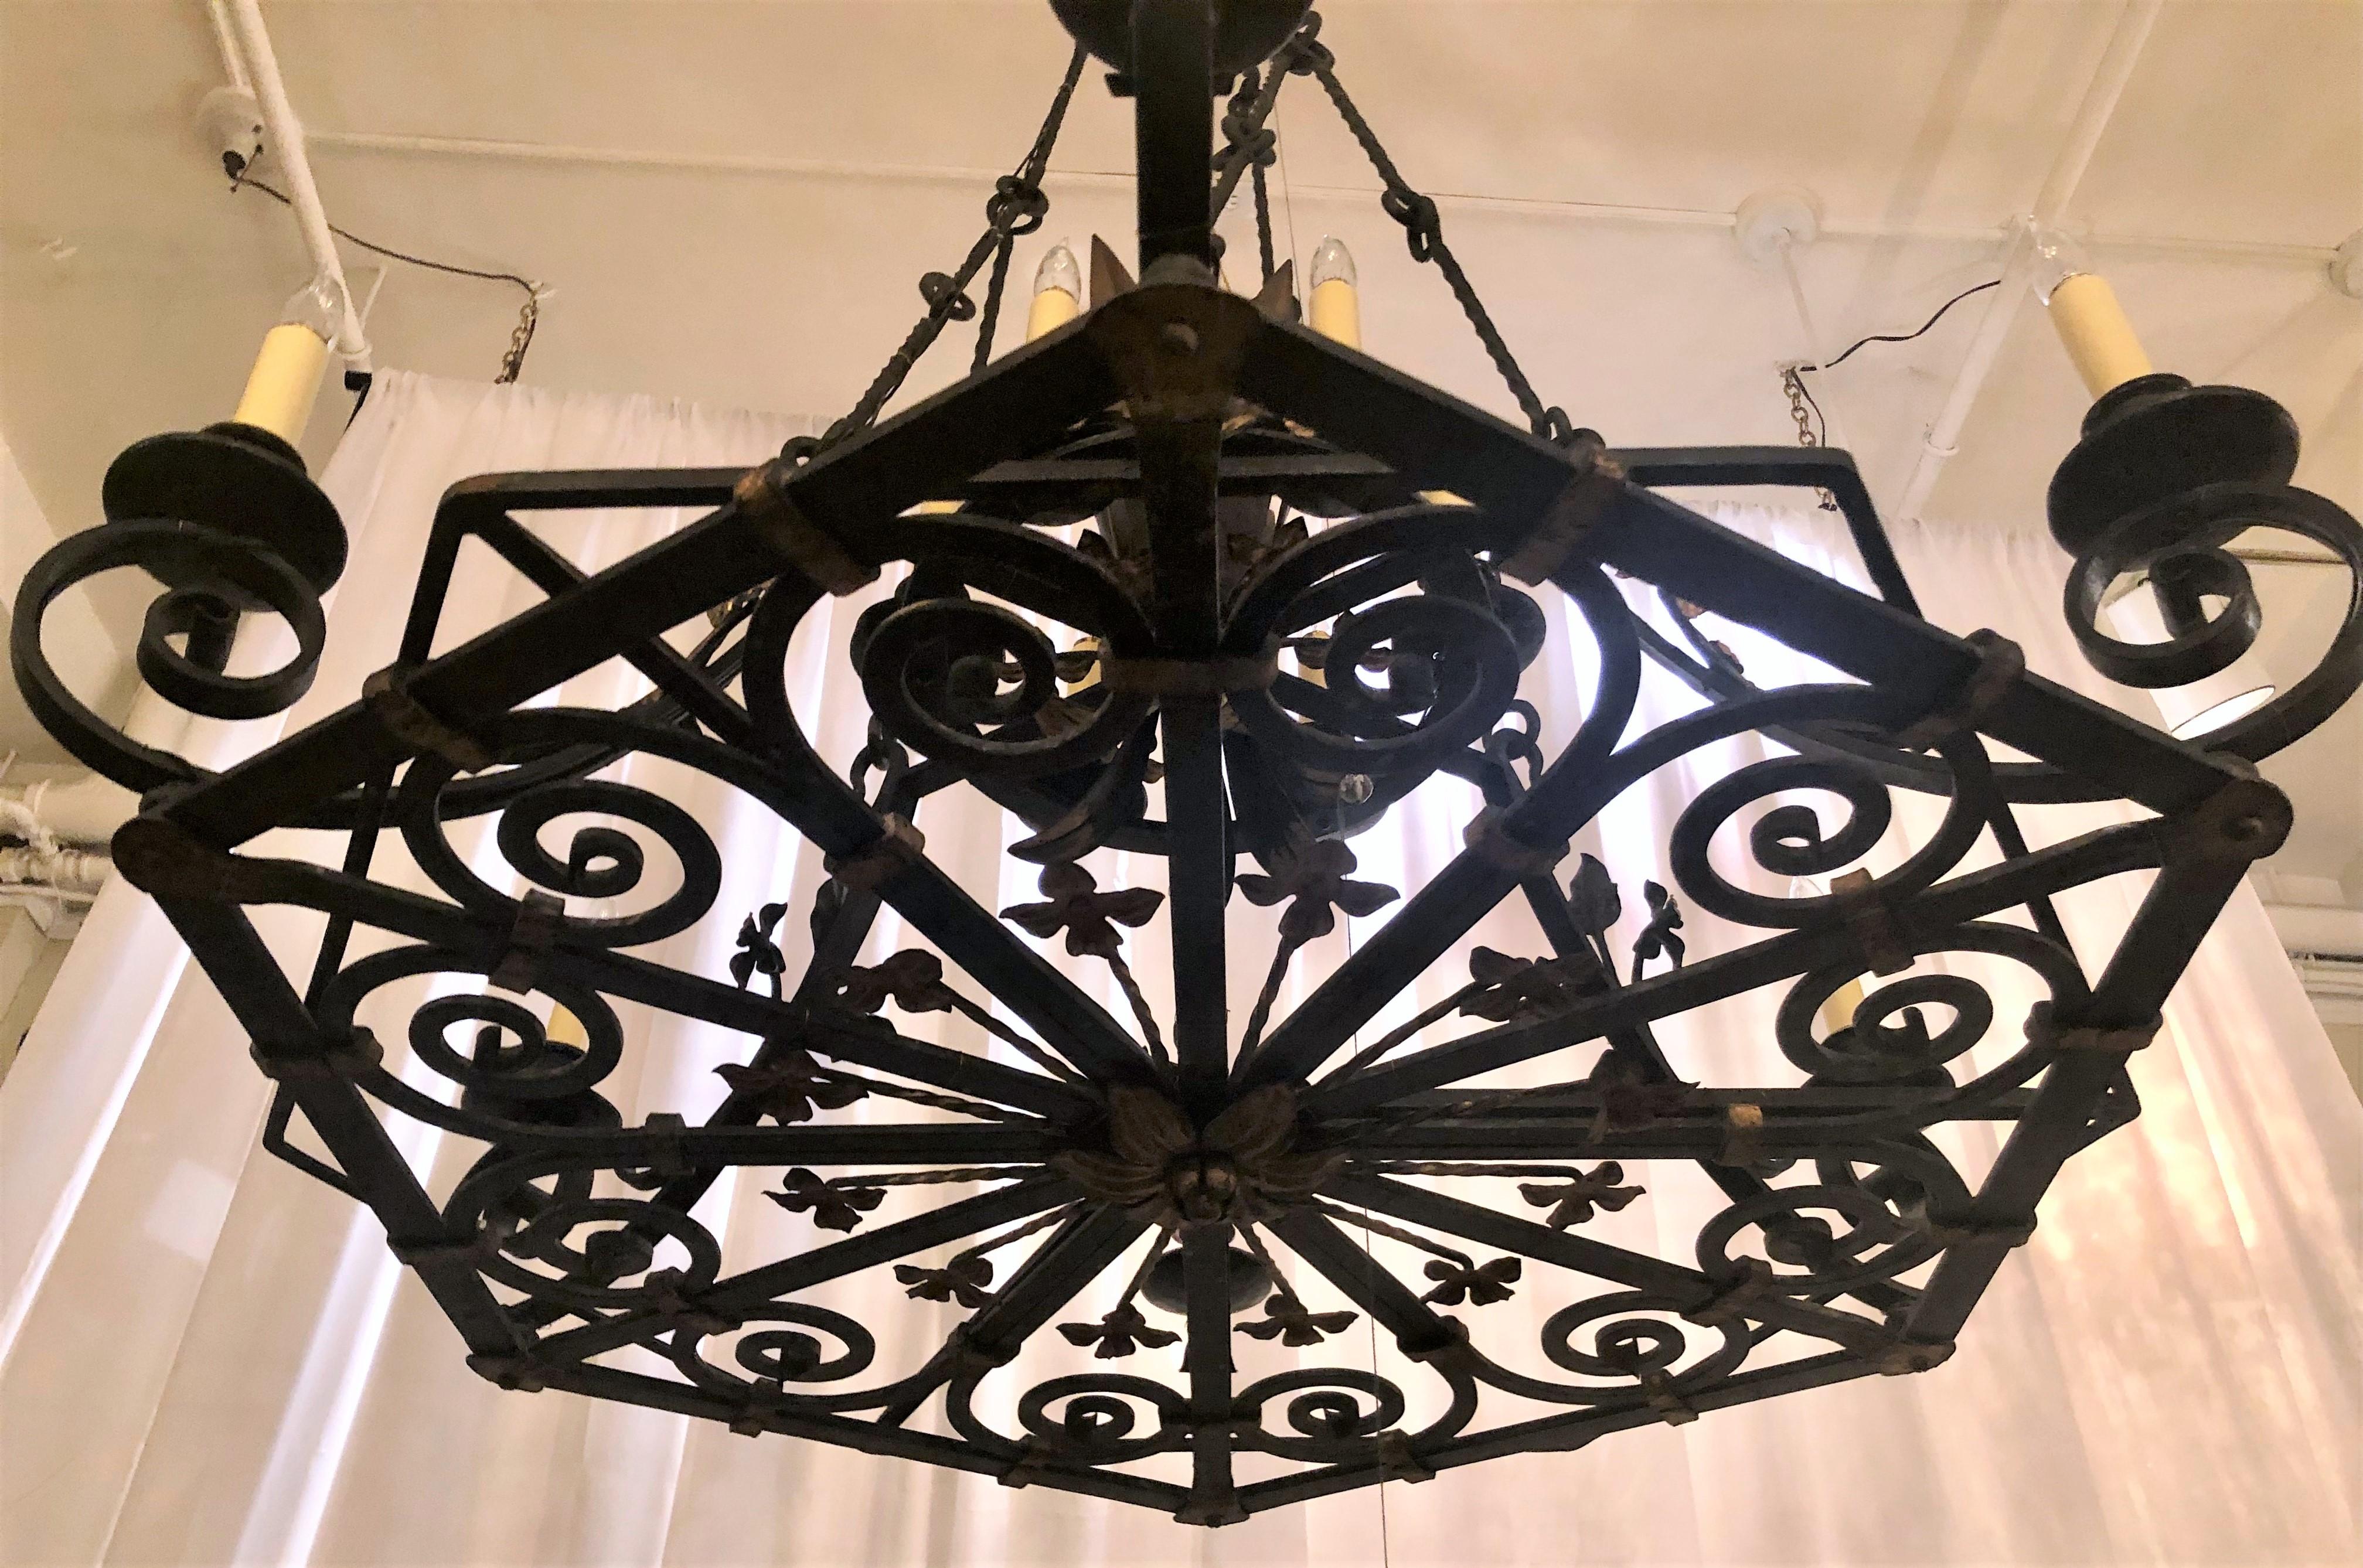 Grand Size Antique French Wrought Iron Chateau Chandelier, circa 1840 1